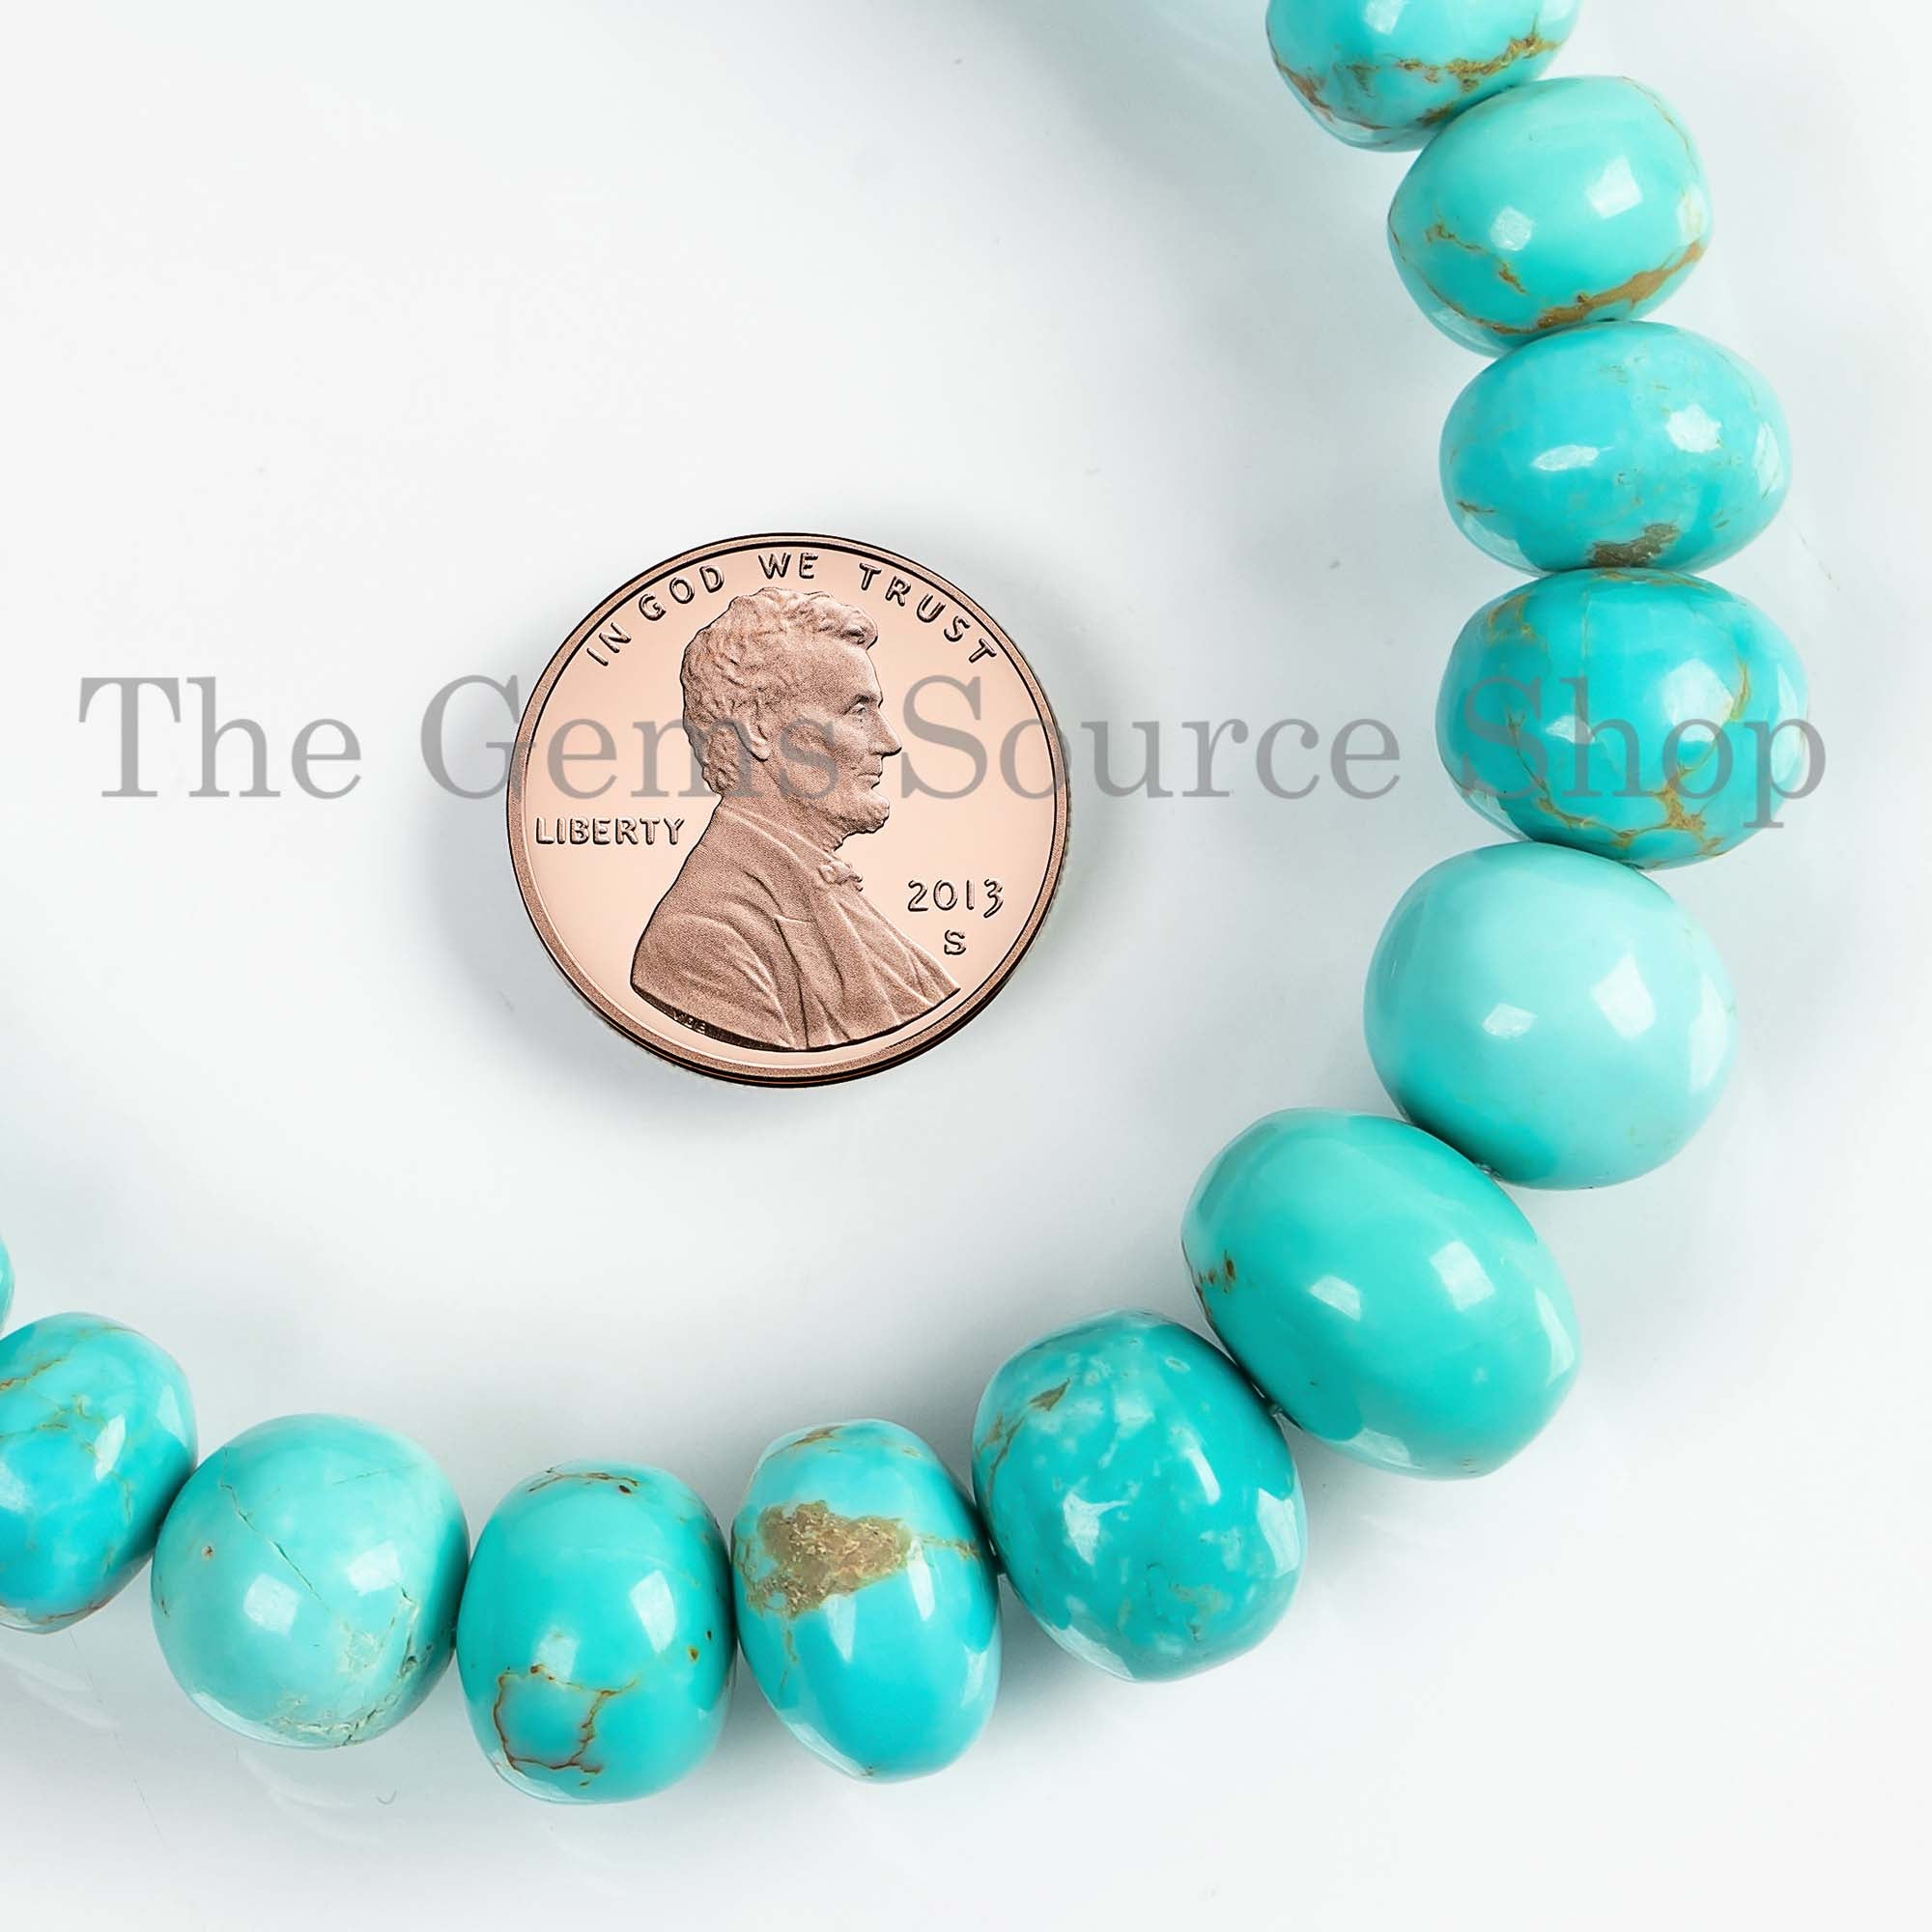 8-13 mm Natural Turquoise Beads, Smooth Rondelle Beads, Plain Turquoise Strand, Jewelry Making Beads